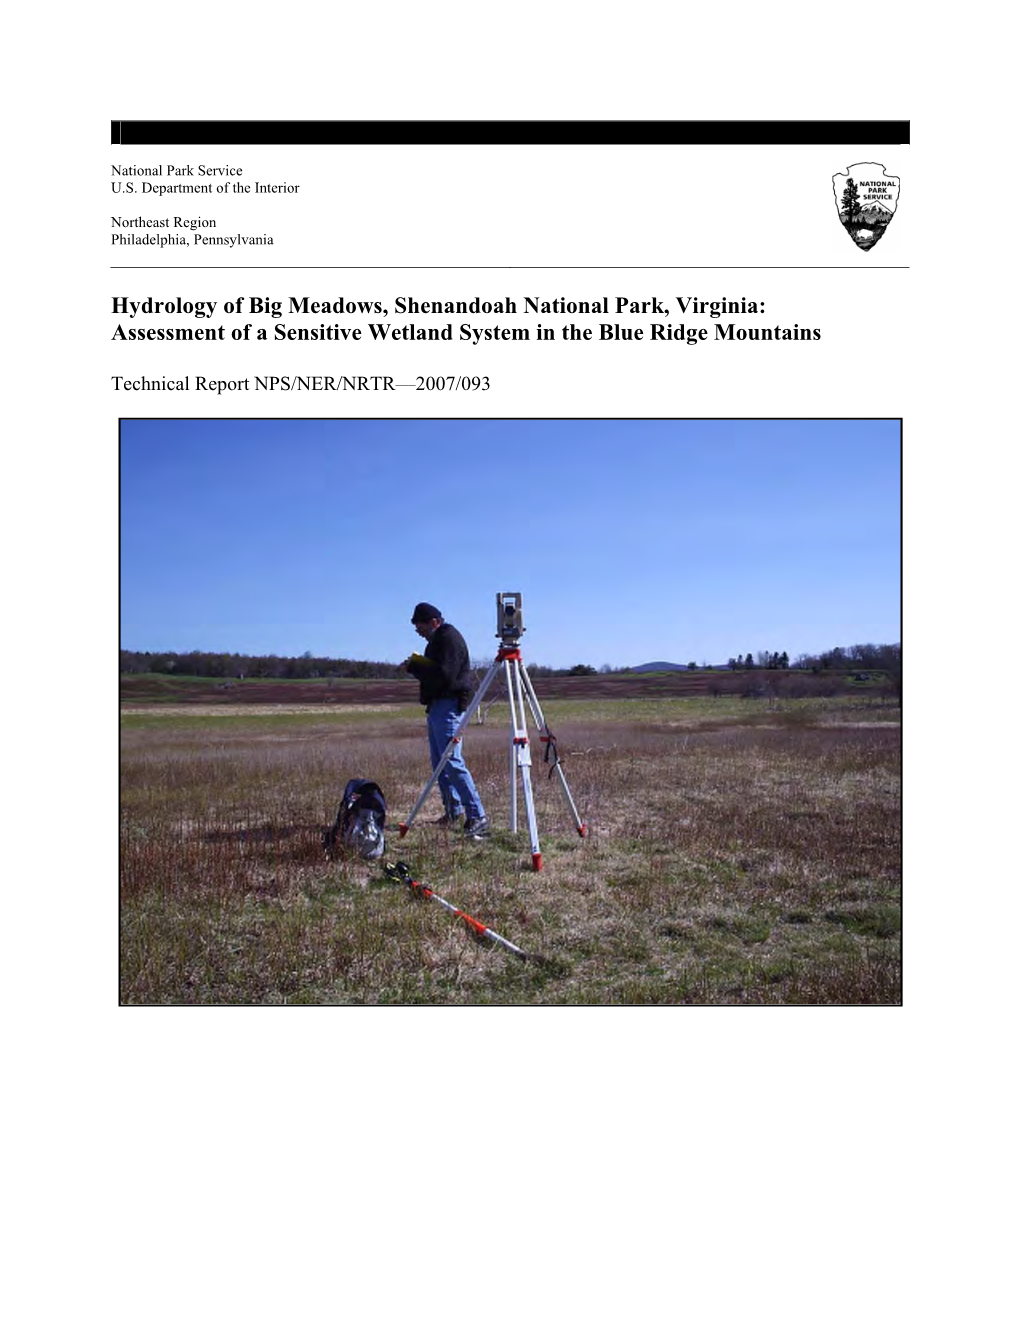 Hydrology of Big Meadows, Shenandoah National Park, Virginia: Assessment of a Sensitive Wetland System in the Blue Ridge Mountains